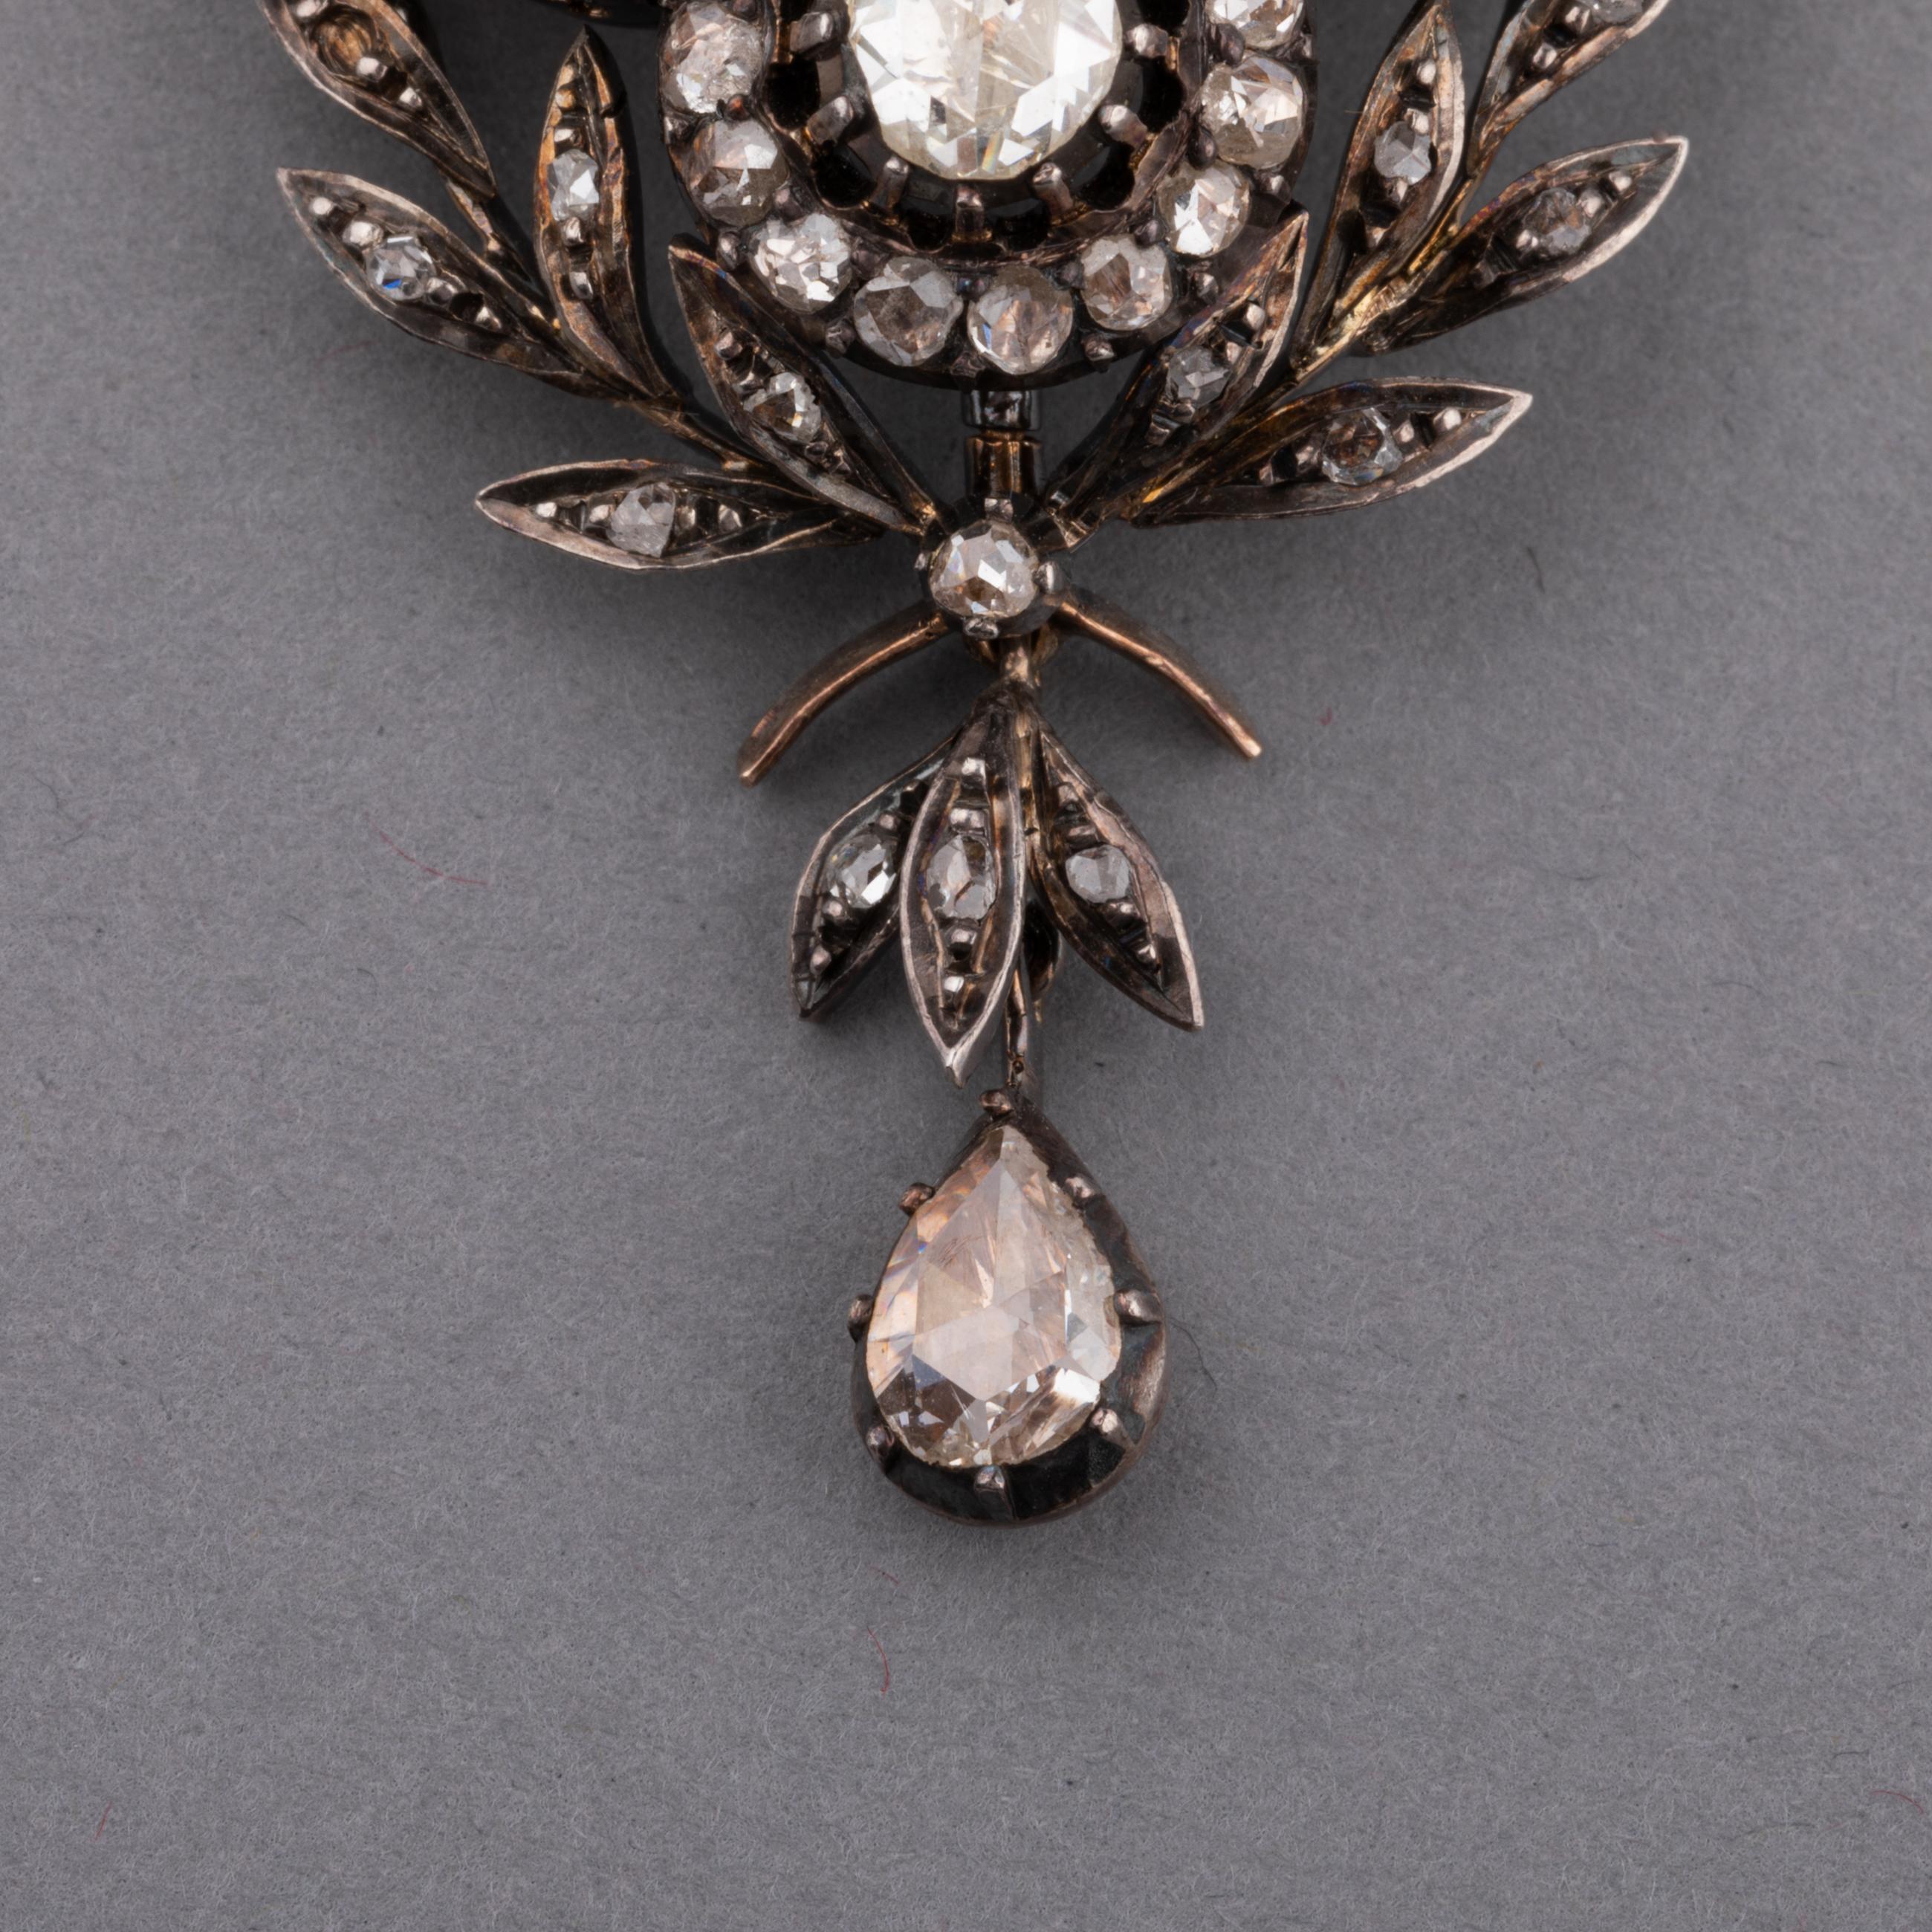 A lovely antique pendant, possible to add a chain.
Made in France circa 1860. Made in rose gold 18k and silver.
The diamonds are rose cut, 3 carats total approximately.
Dimensions: 65 mm height and 30 mm width.
Weight:16.40 grams.